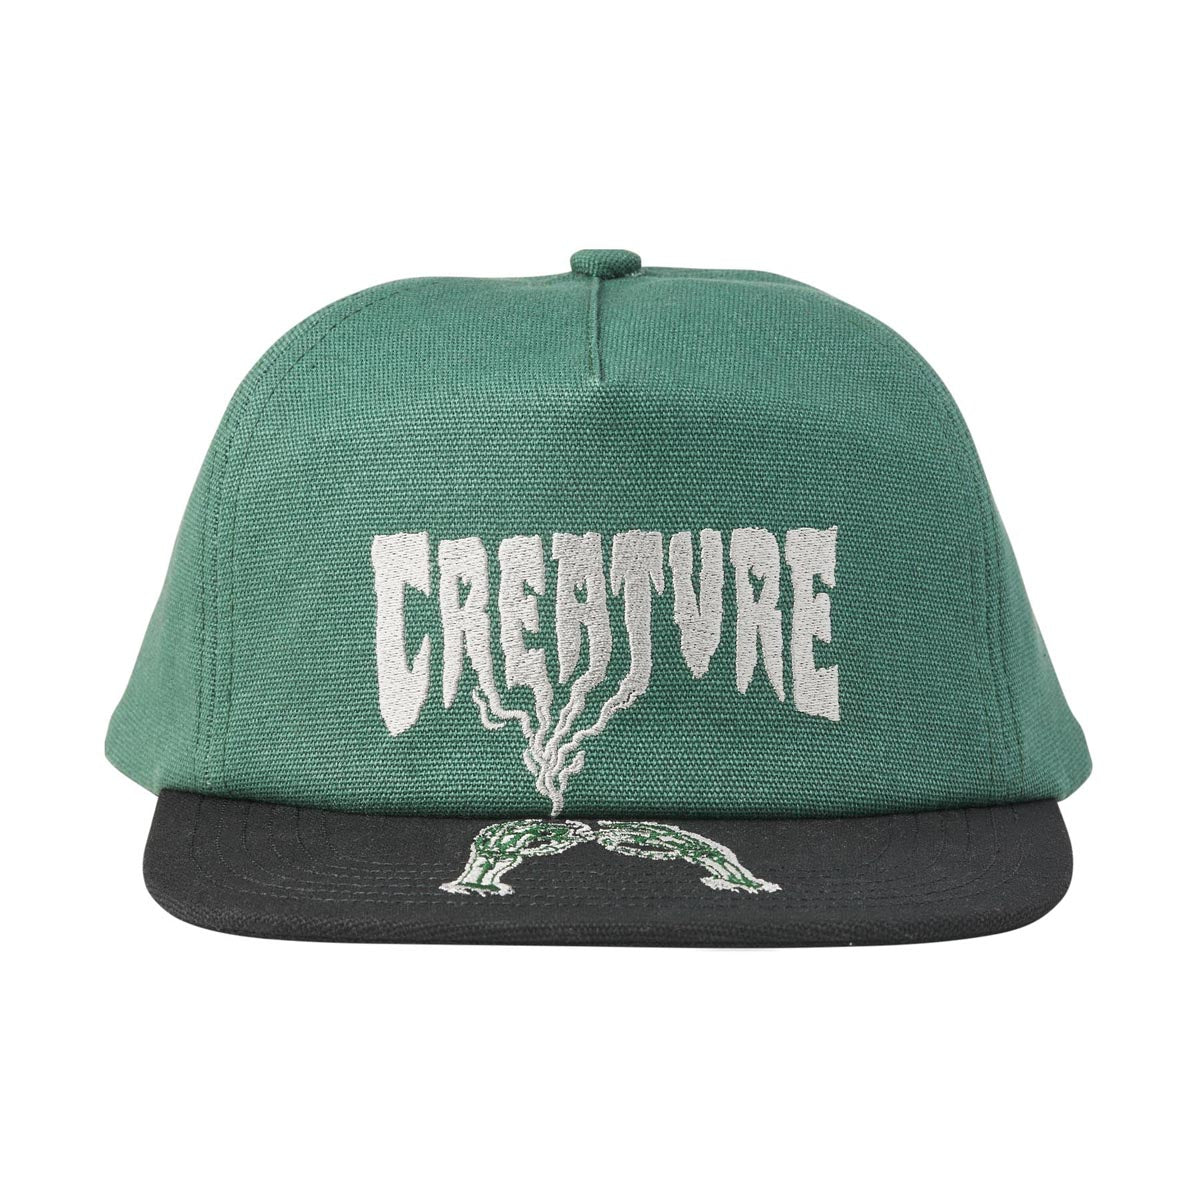 Creature Rolling In The Grave Snapback Hat - Dark Green/Black image 2